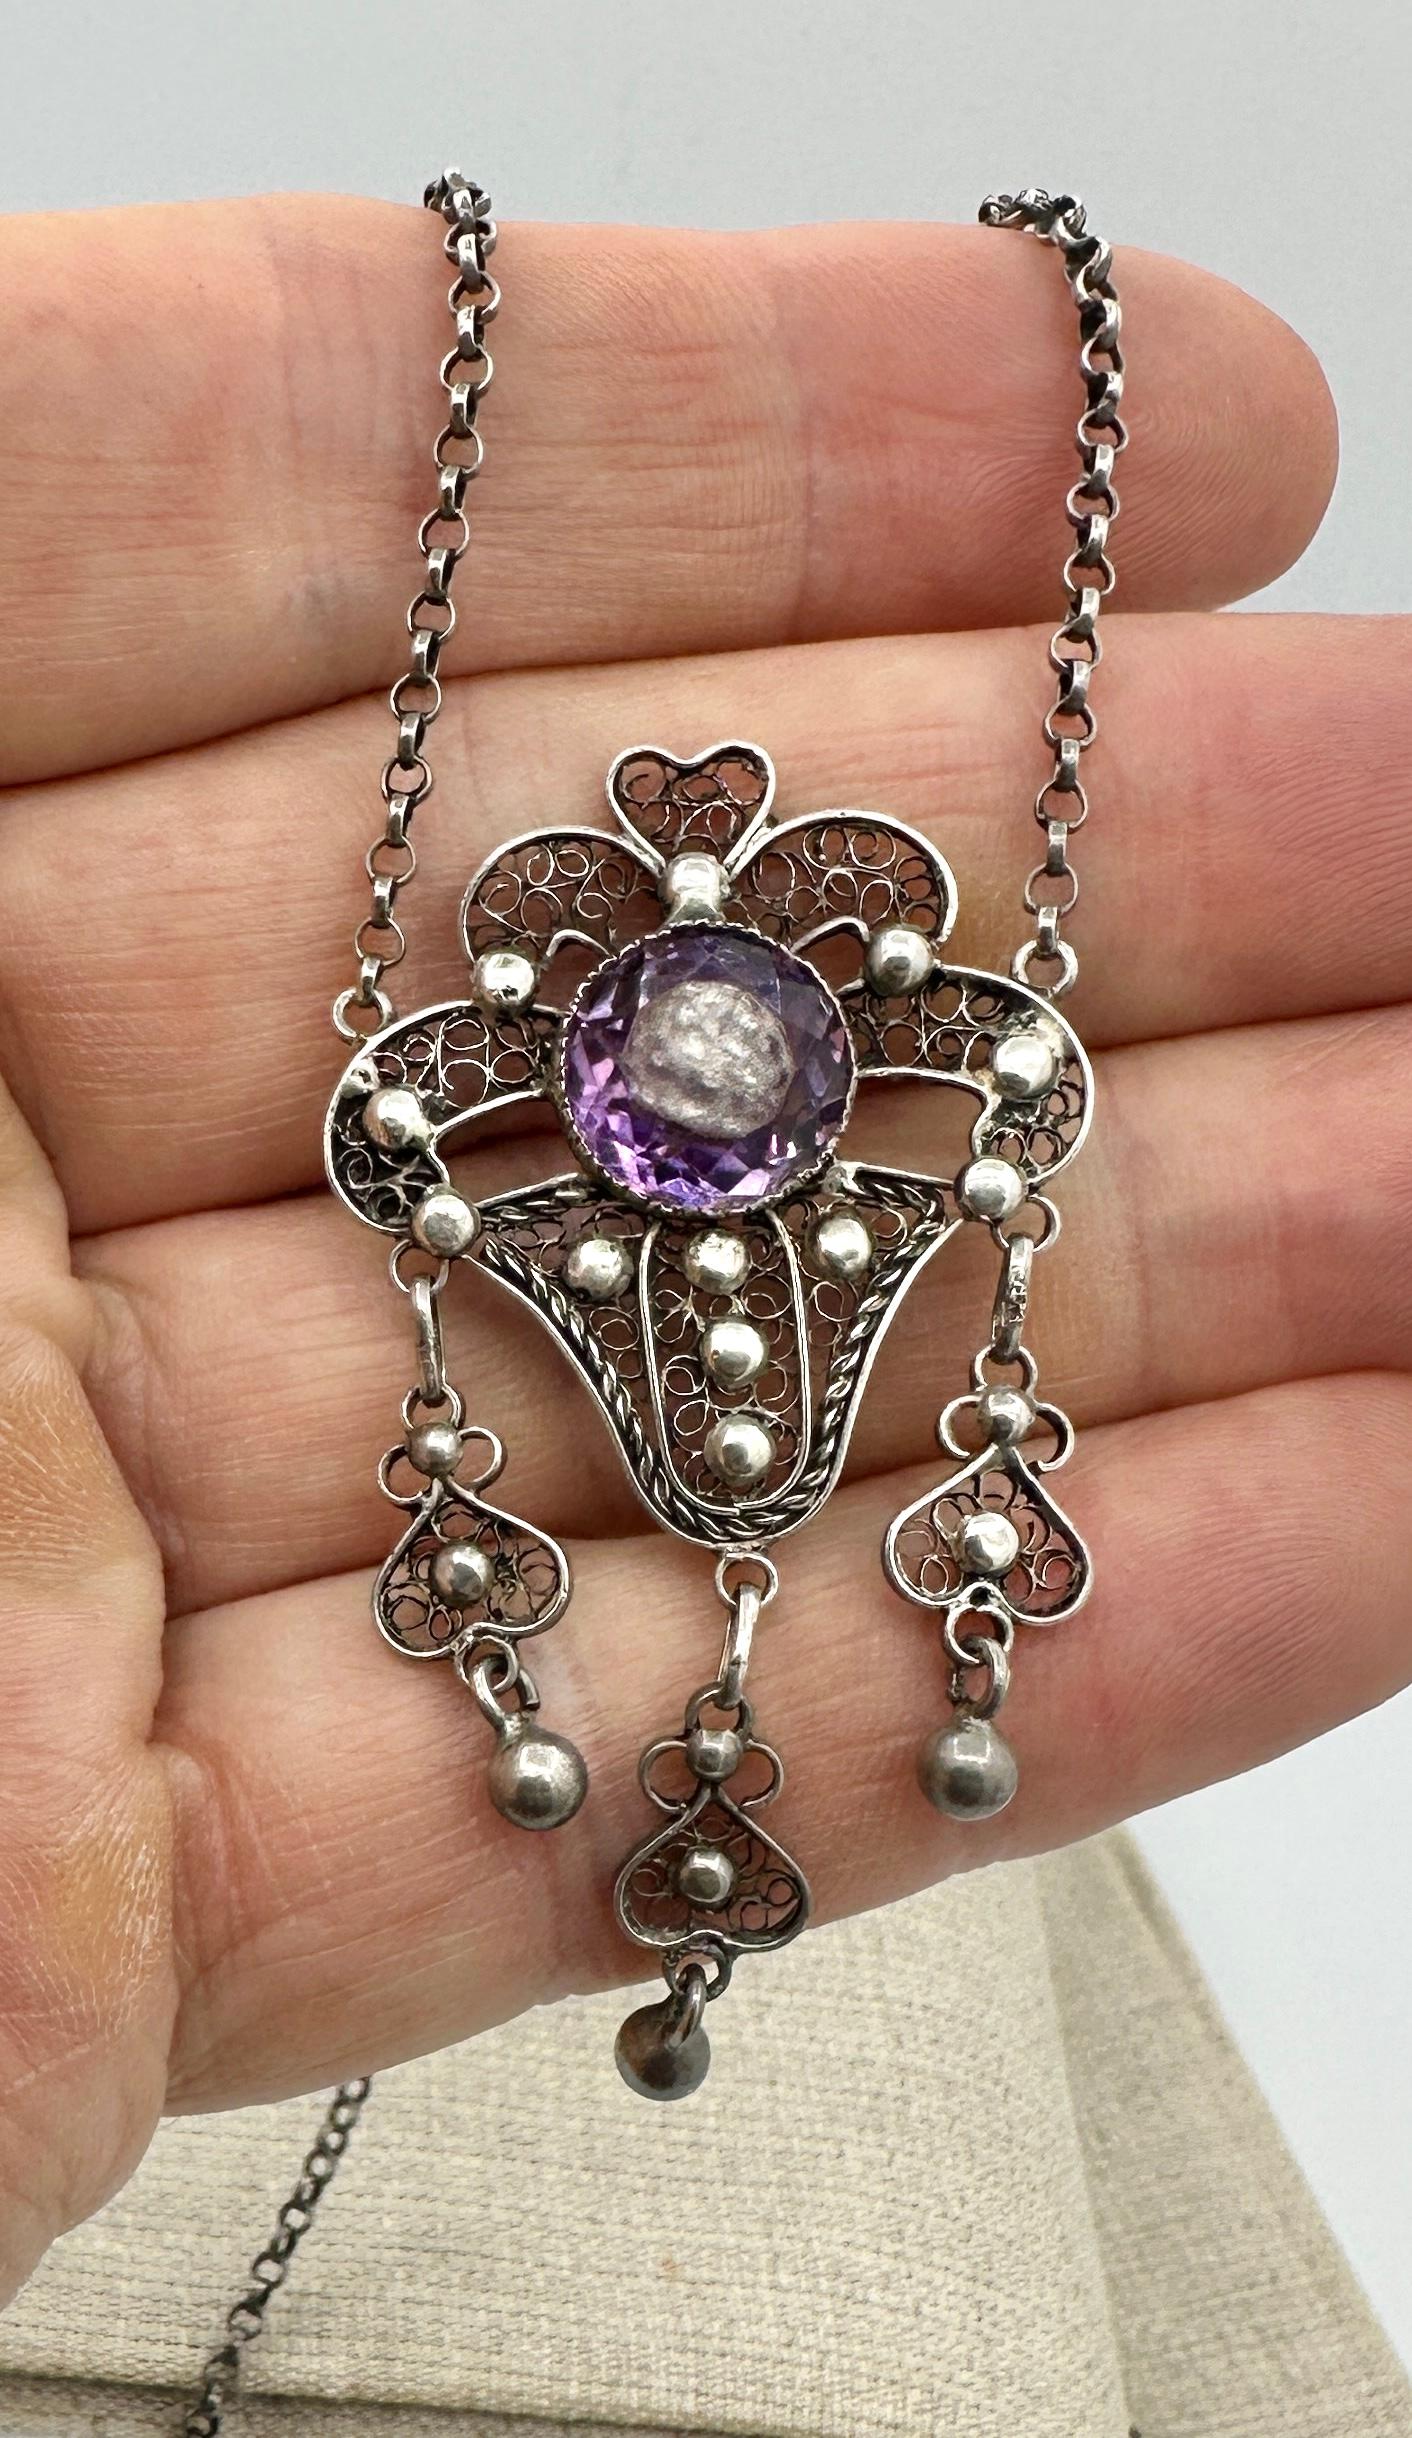 5.5 Carat Rose De France Amethyst Pendant Necklace Arts & Crafts Antique Silver In Excellent Condition For Sale In New York, NY